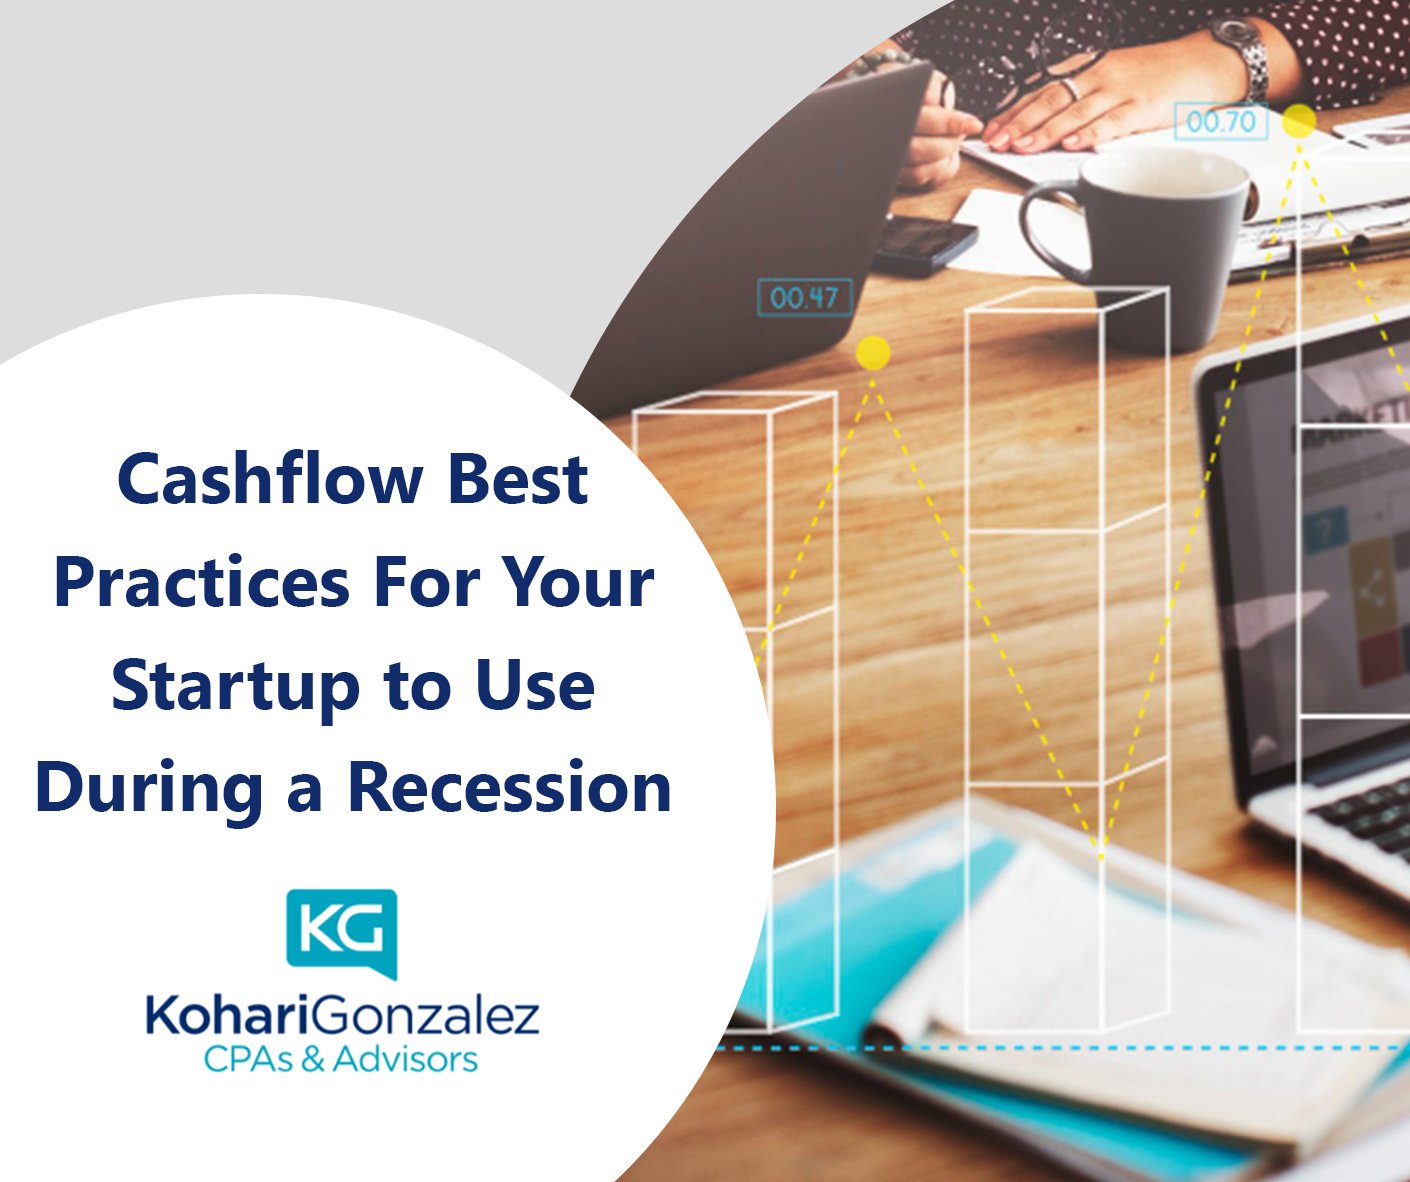 Cashflow Best Practices For Your Startup to Use During a Recession and Beyond